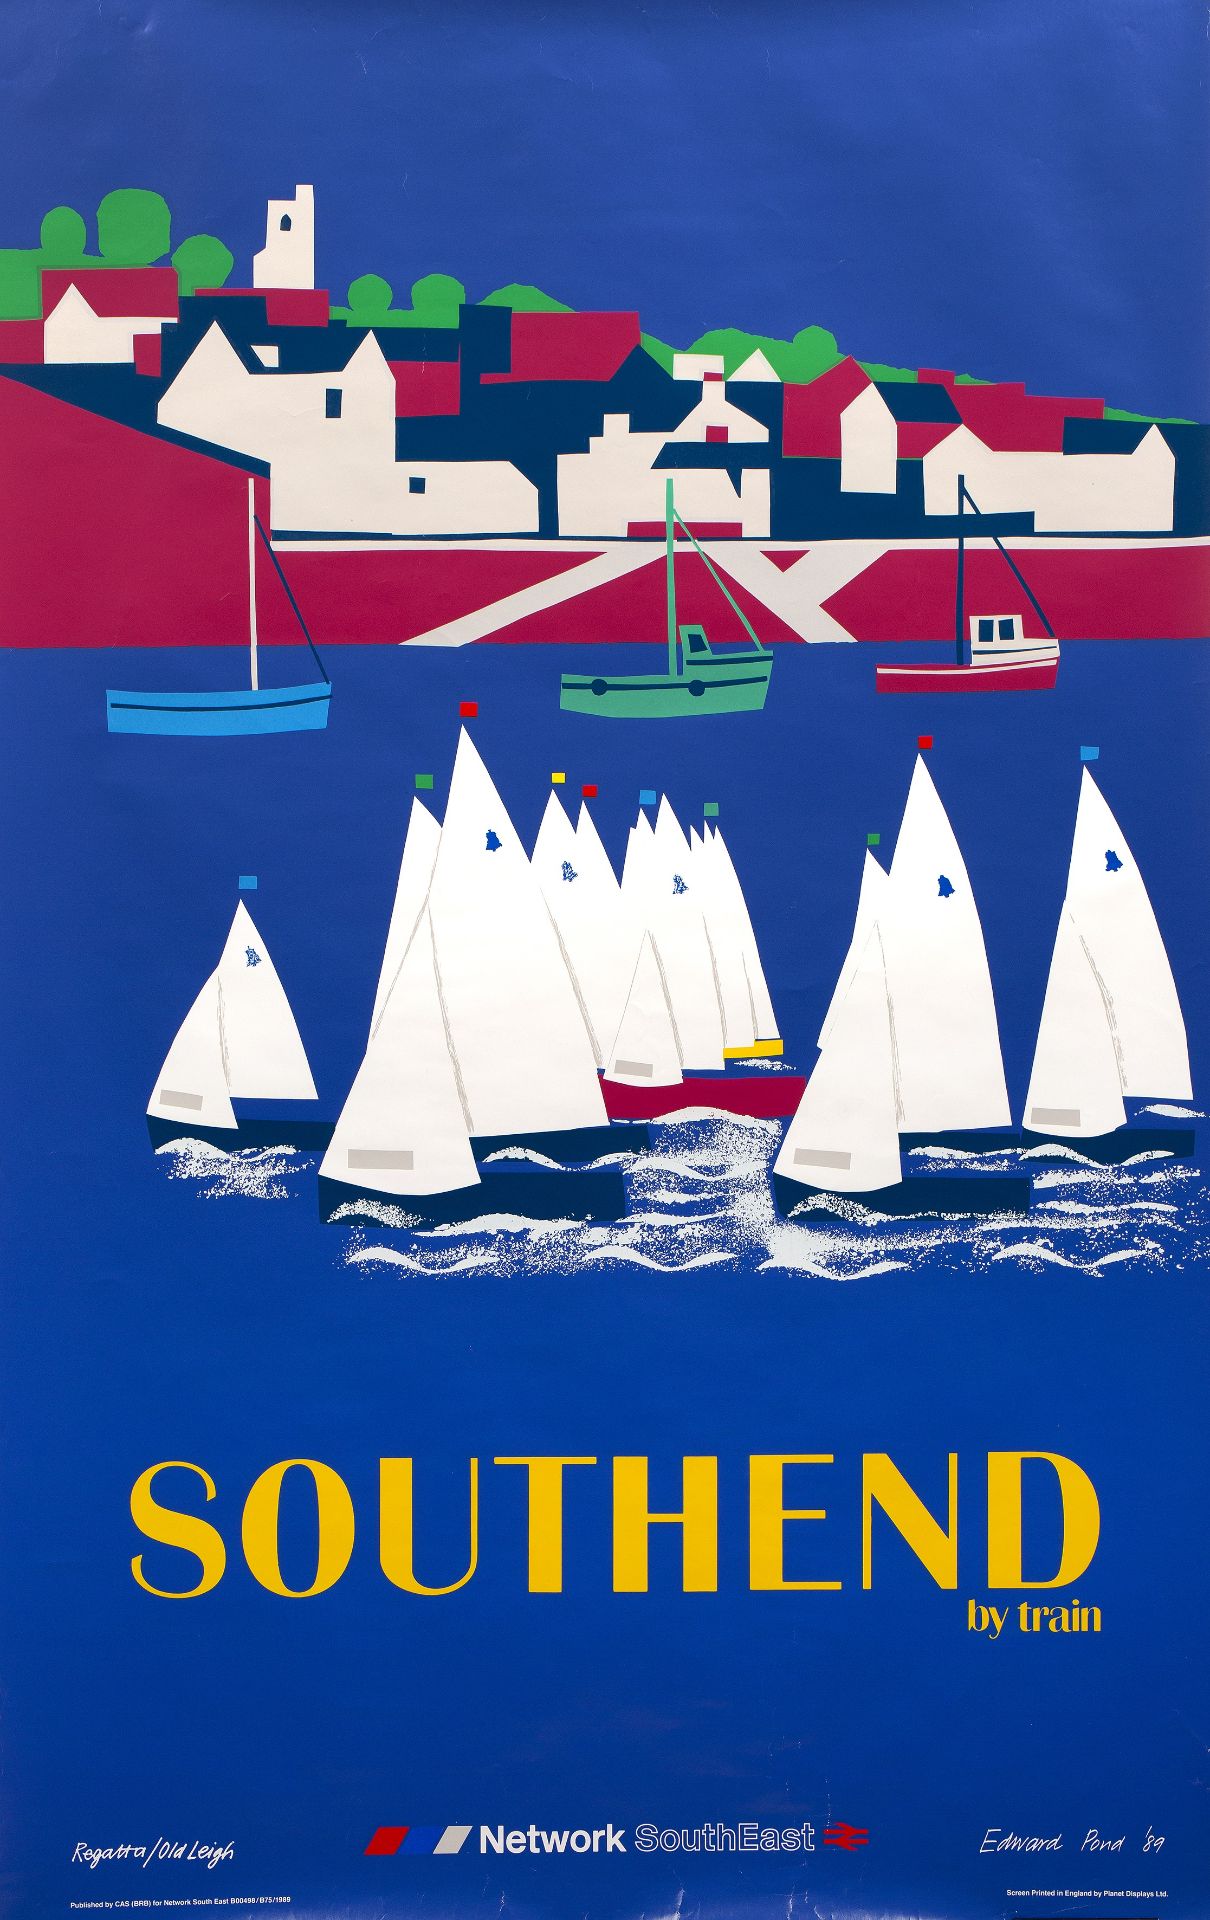 Edward Pond (1929-2012) 'South-End', Network South East advertising poster, unframed, 102cm x 64cm